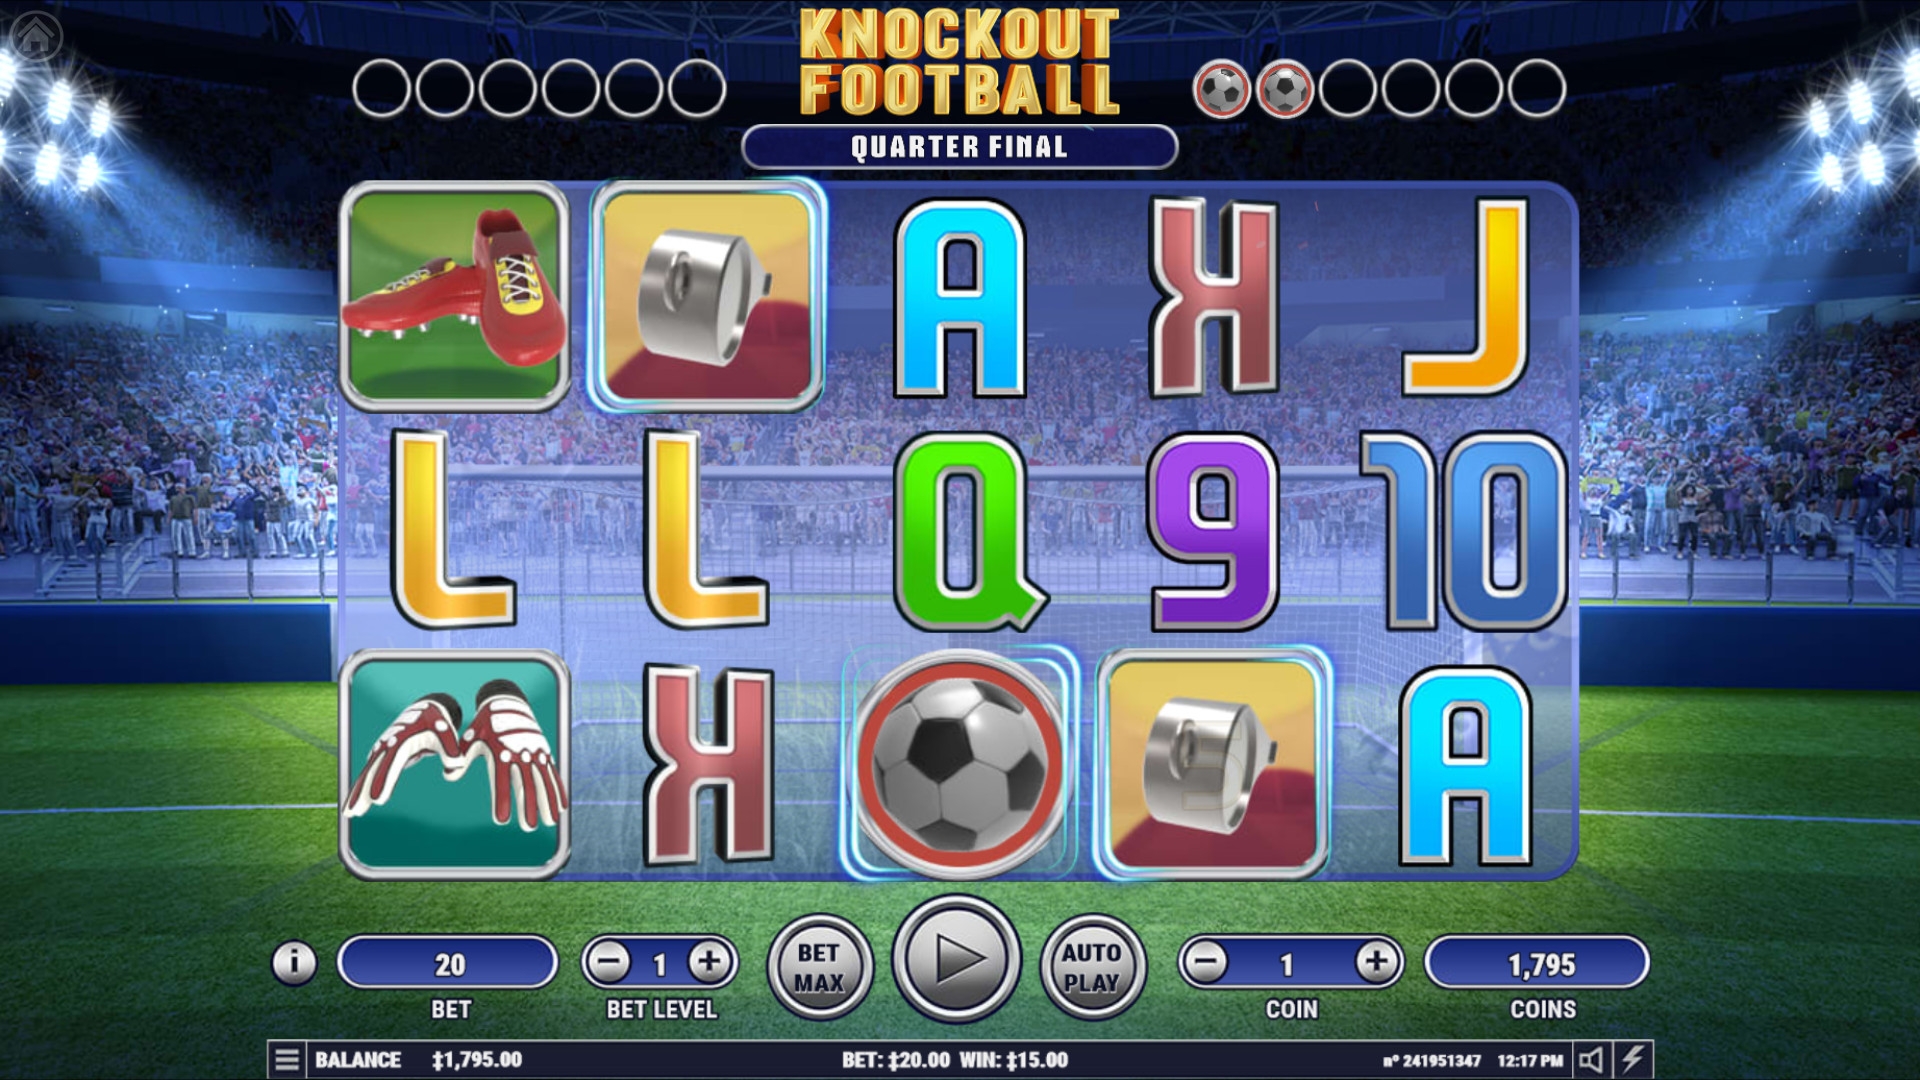 Knockout Football (Knockout Football) from category Slots